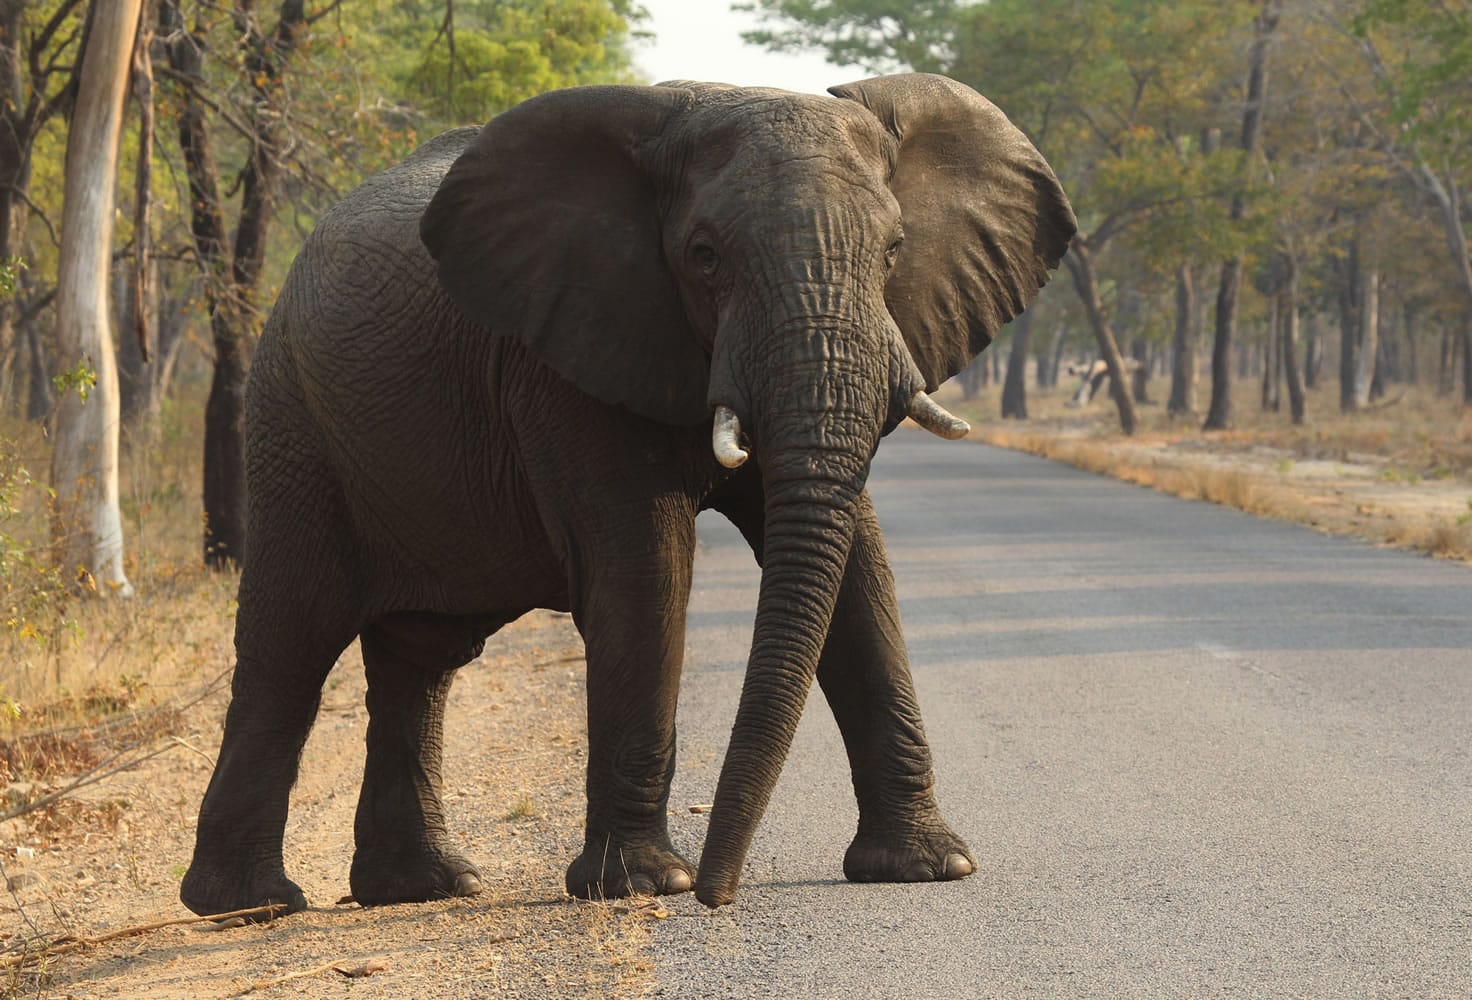 An elephant crosses a road in Hwange National Park, Zimbabwe, about 700 kilometres south west of Harare. Cancer is much less common in elephants than in humans, even though the big beasts&#039; bodies have many more cells.